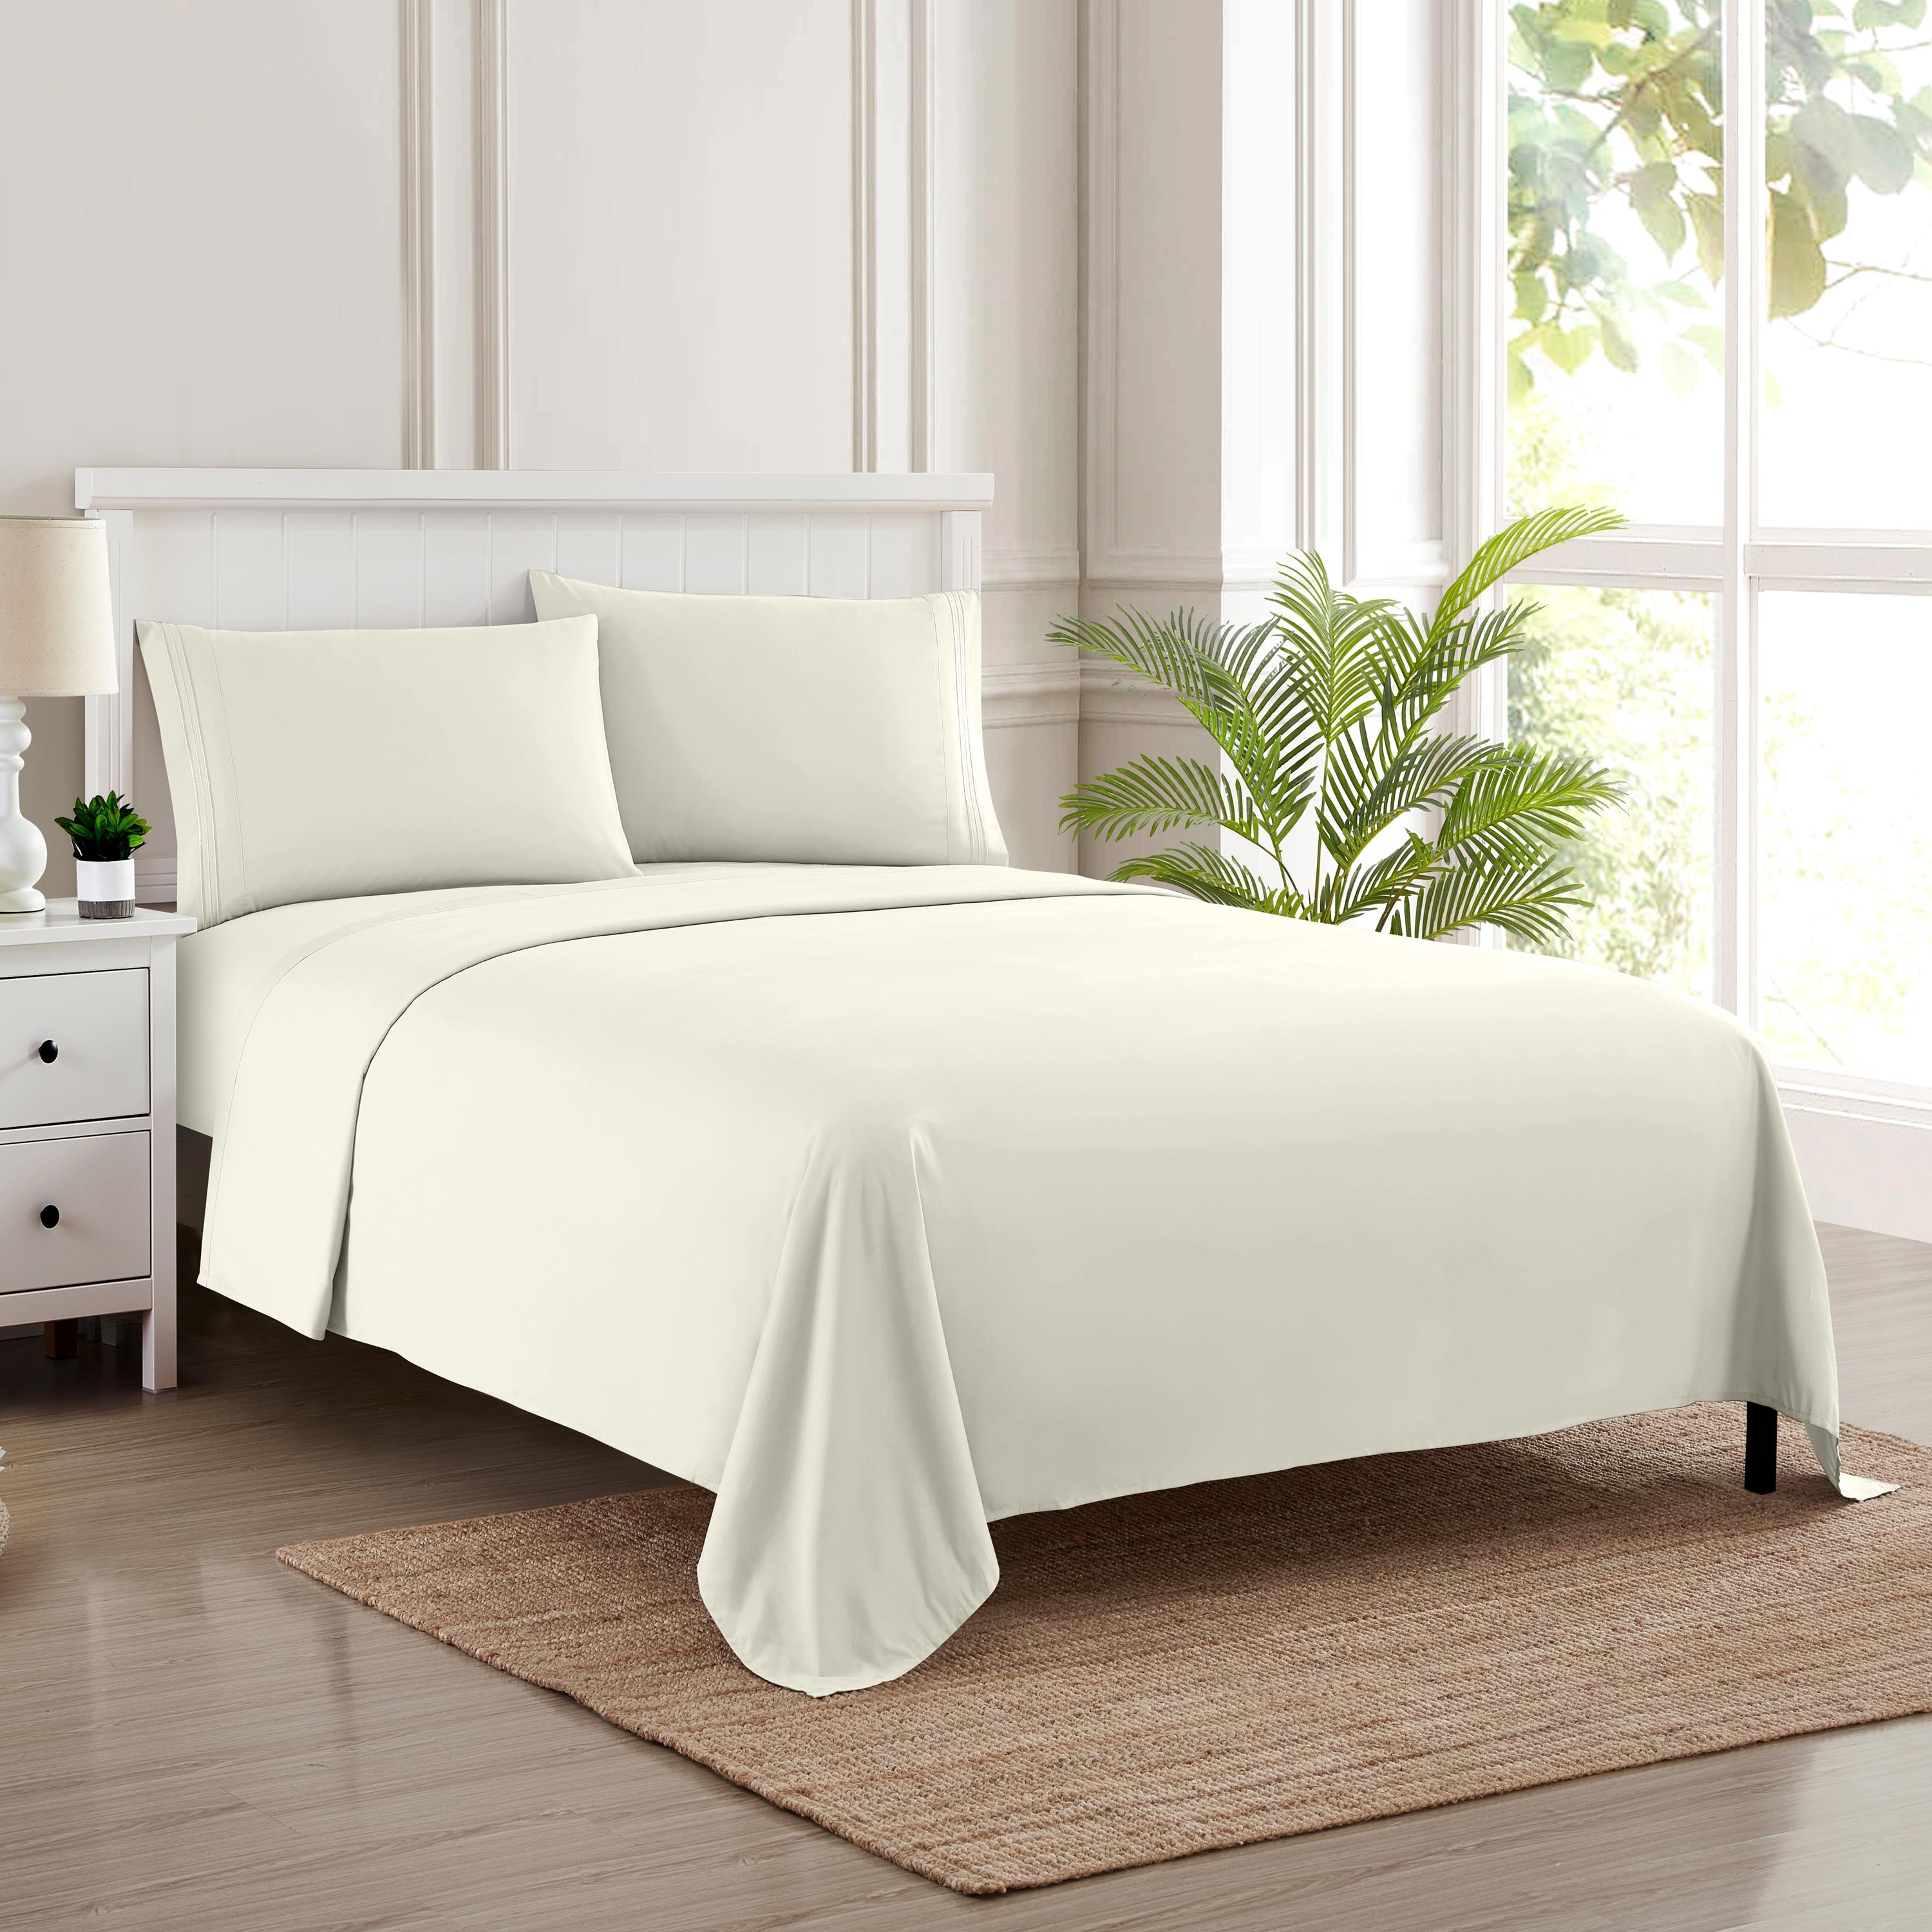 https://ak1.ostkcdn.com/images/products/is/images/direct/90f45fabfcb3529abea55601b33a39e2596bd040/Deep-Pocket-Soft-Microfiber-4-piece-Solid-Color-Bed-Sheet-Set.jpg